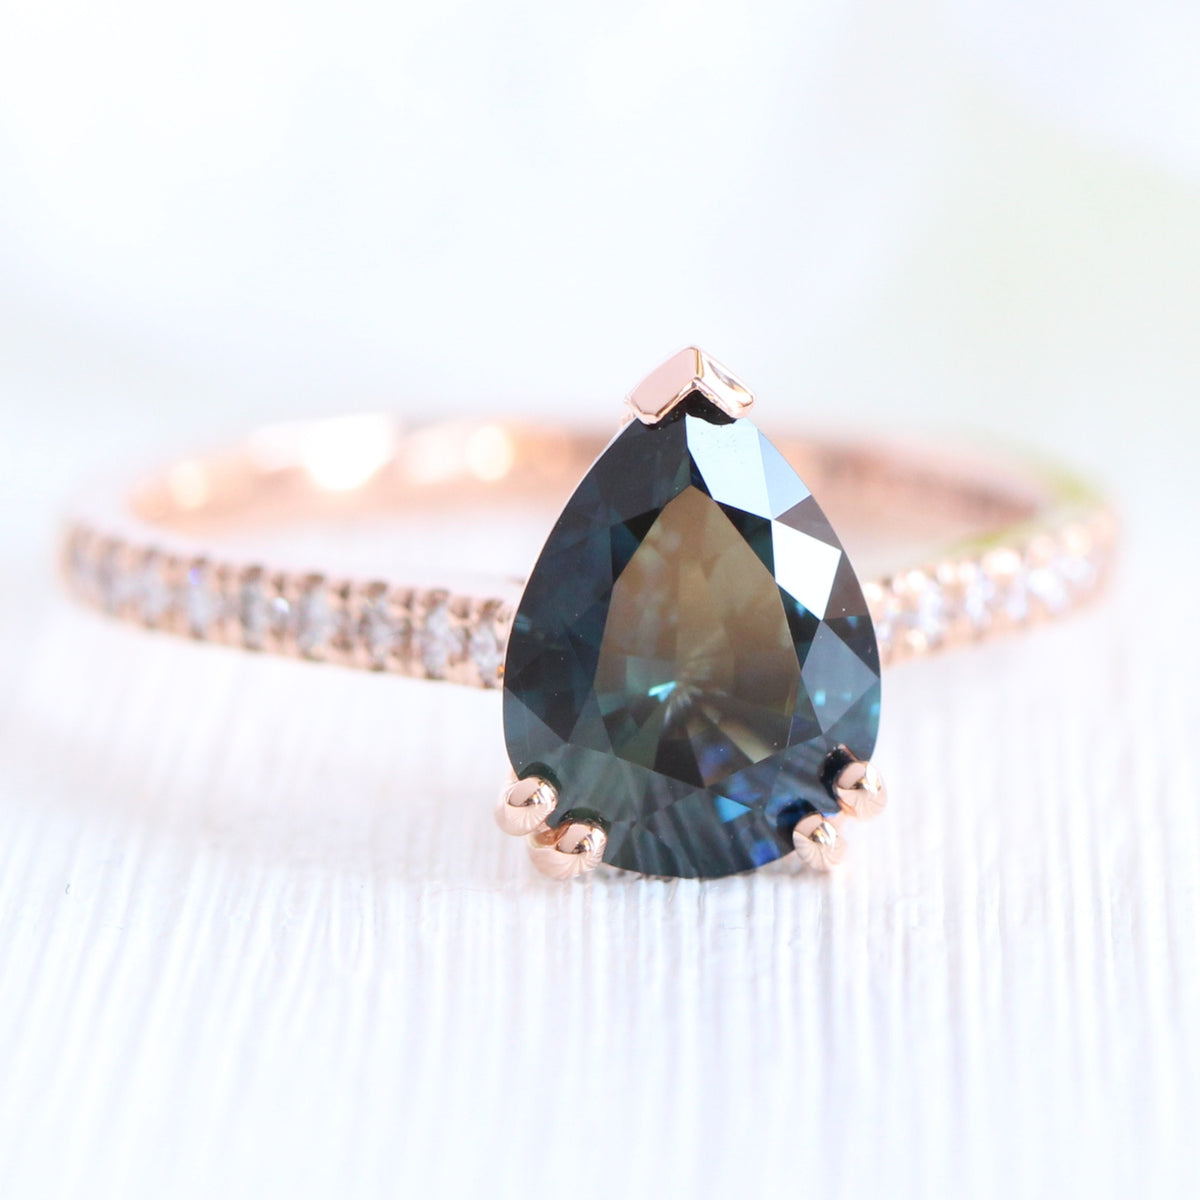 Solitaire pear teal green sapphire ring rose gold pave diamond band la more design jewelry